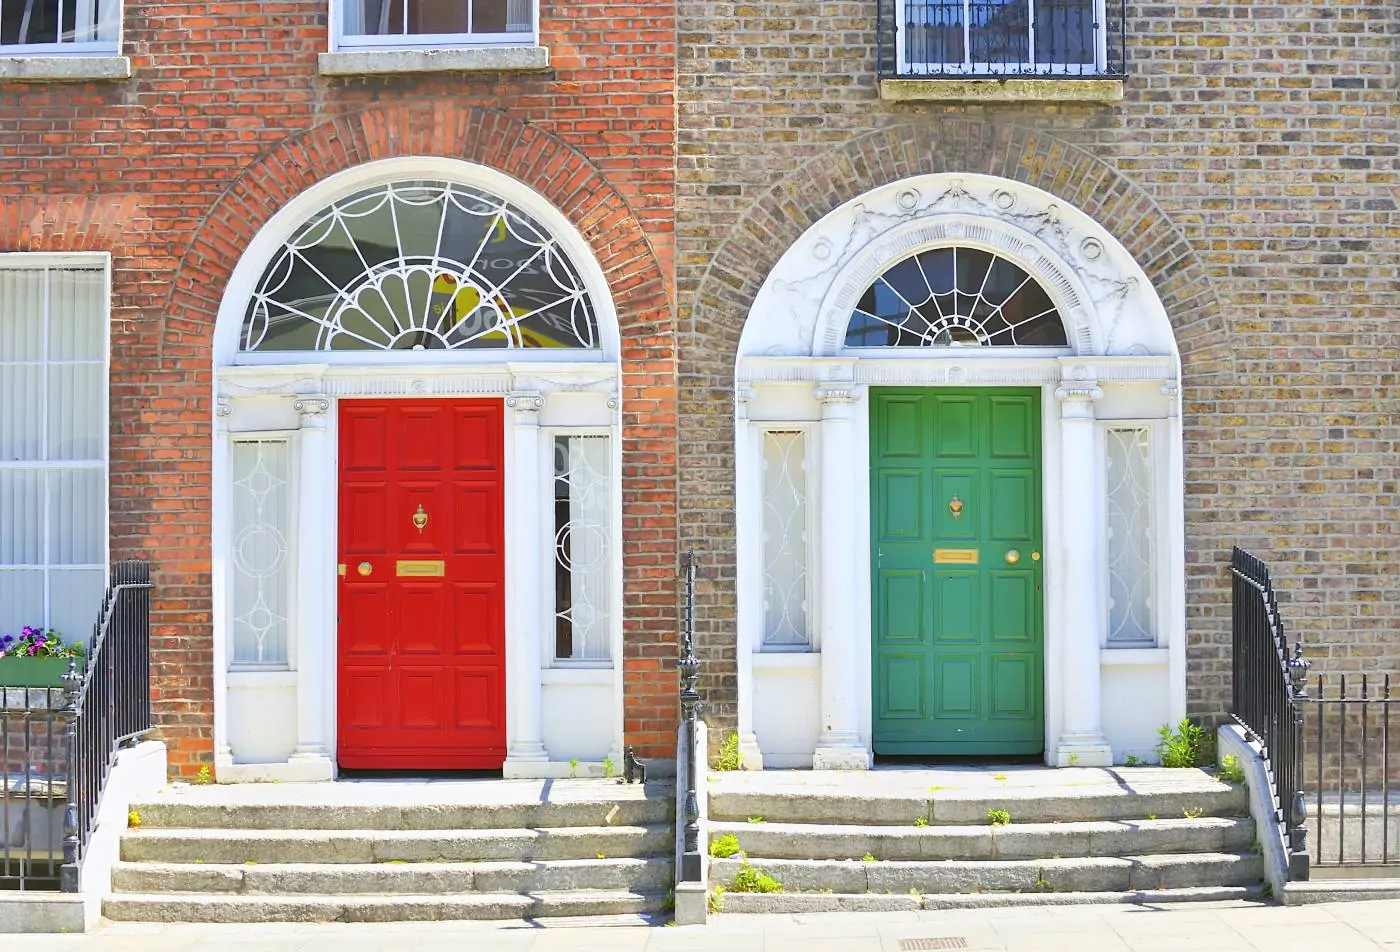 Georgian doors in Dublin's Merrion Square | c/o Deposit Photos as part of 7 day Ireland Itinerary